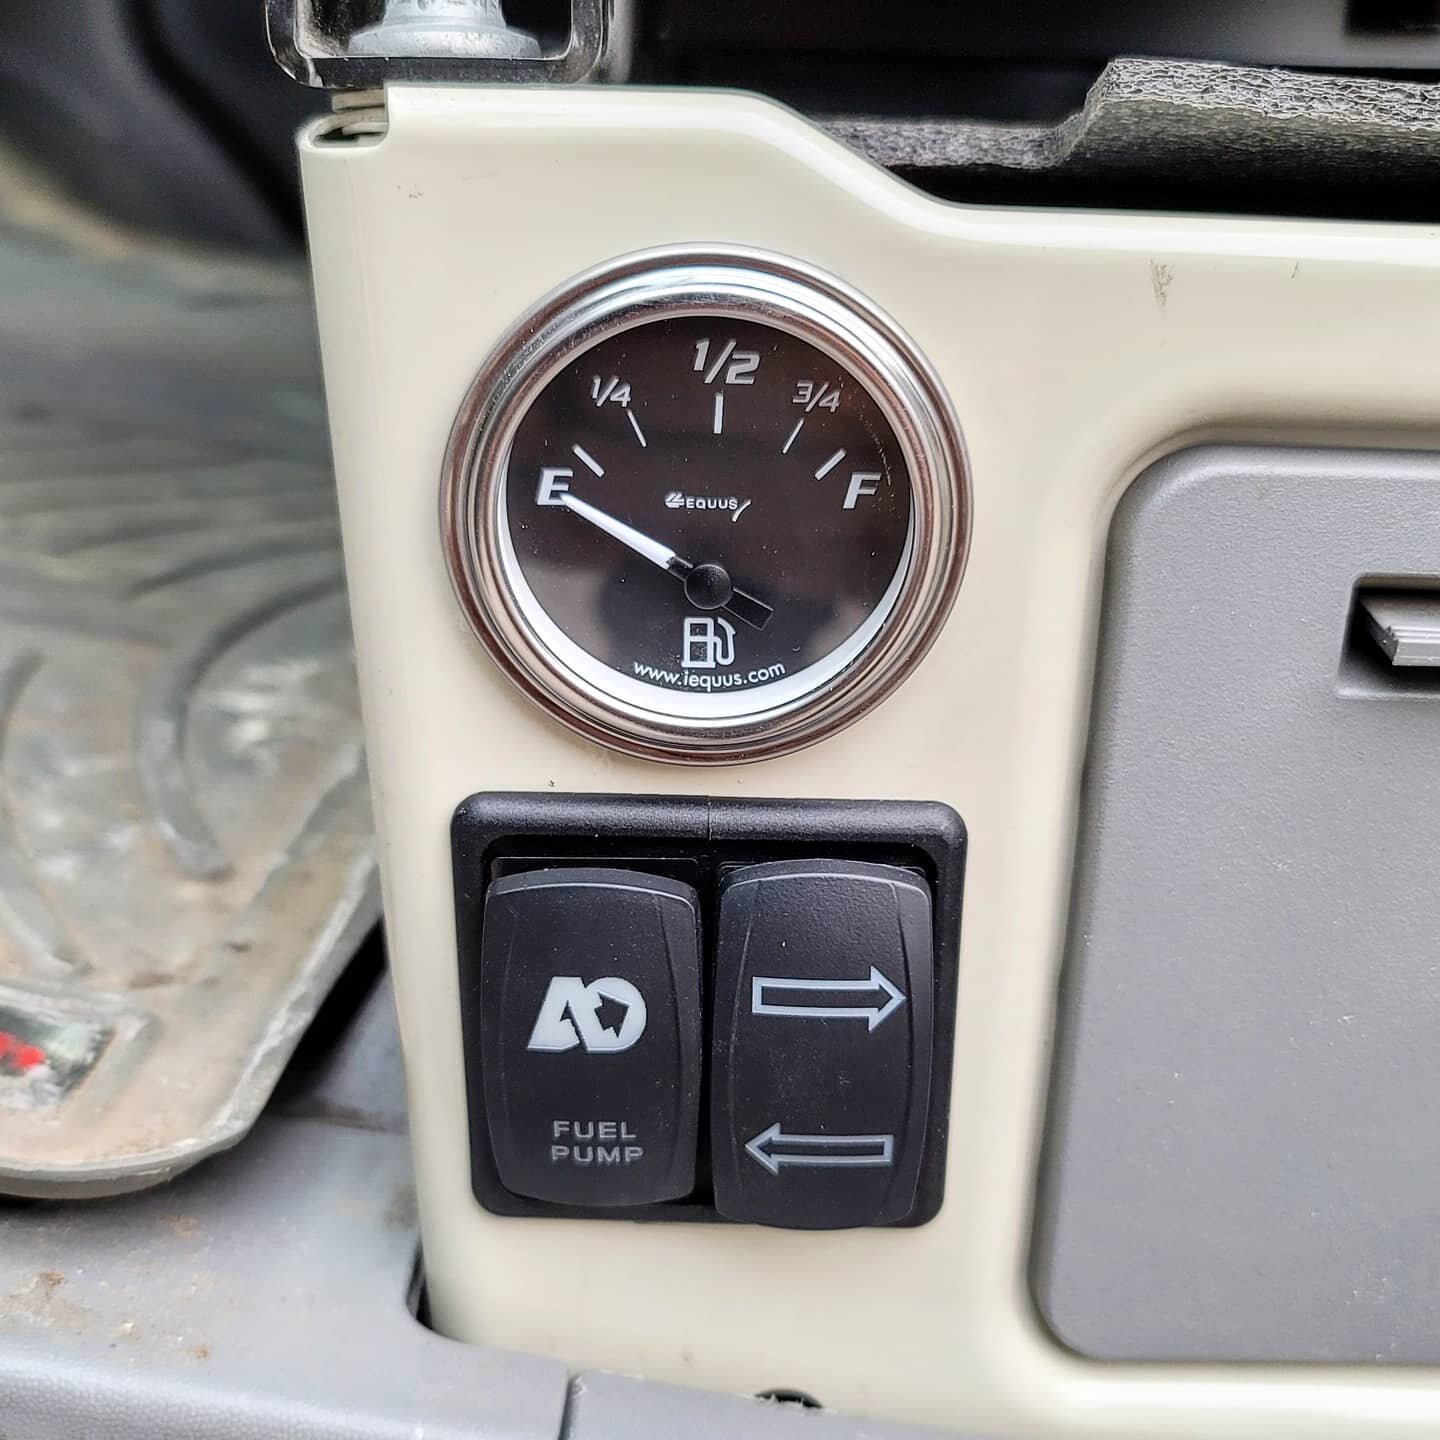 When you're rocking a beast of a conversion like this - @agileoffroad goodies become essential
.
28gal Aux fuel tank ✔
RIP kit w/ weight adjusted leaf pack ✔
.
.
.
.
.
.
.
#mammothvans #vanconversion #campervan #sprintervan #mercedessprinter #vanlife